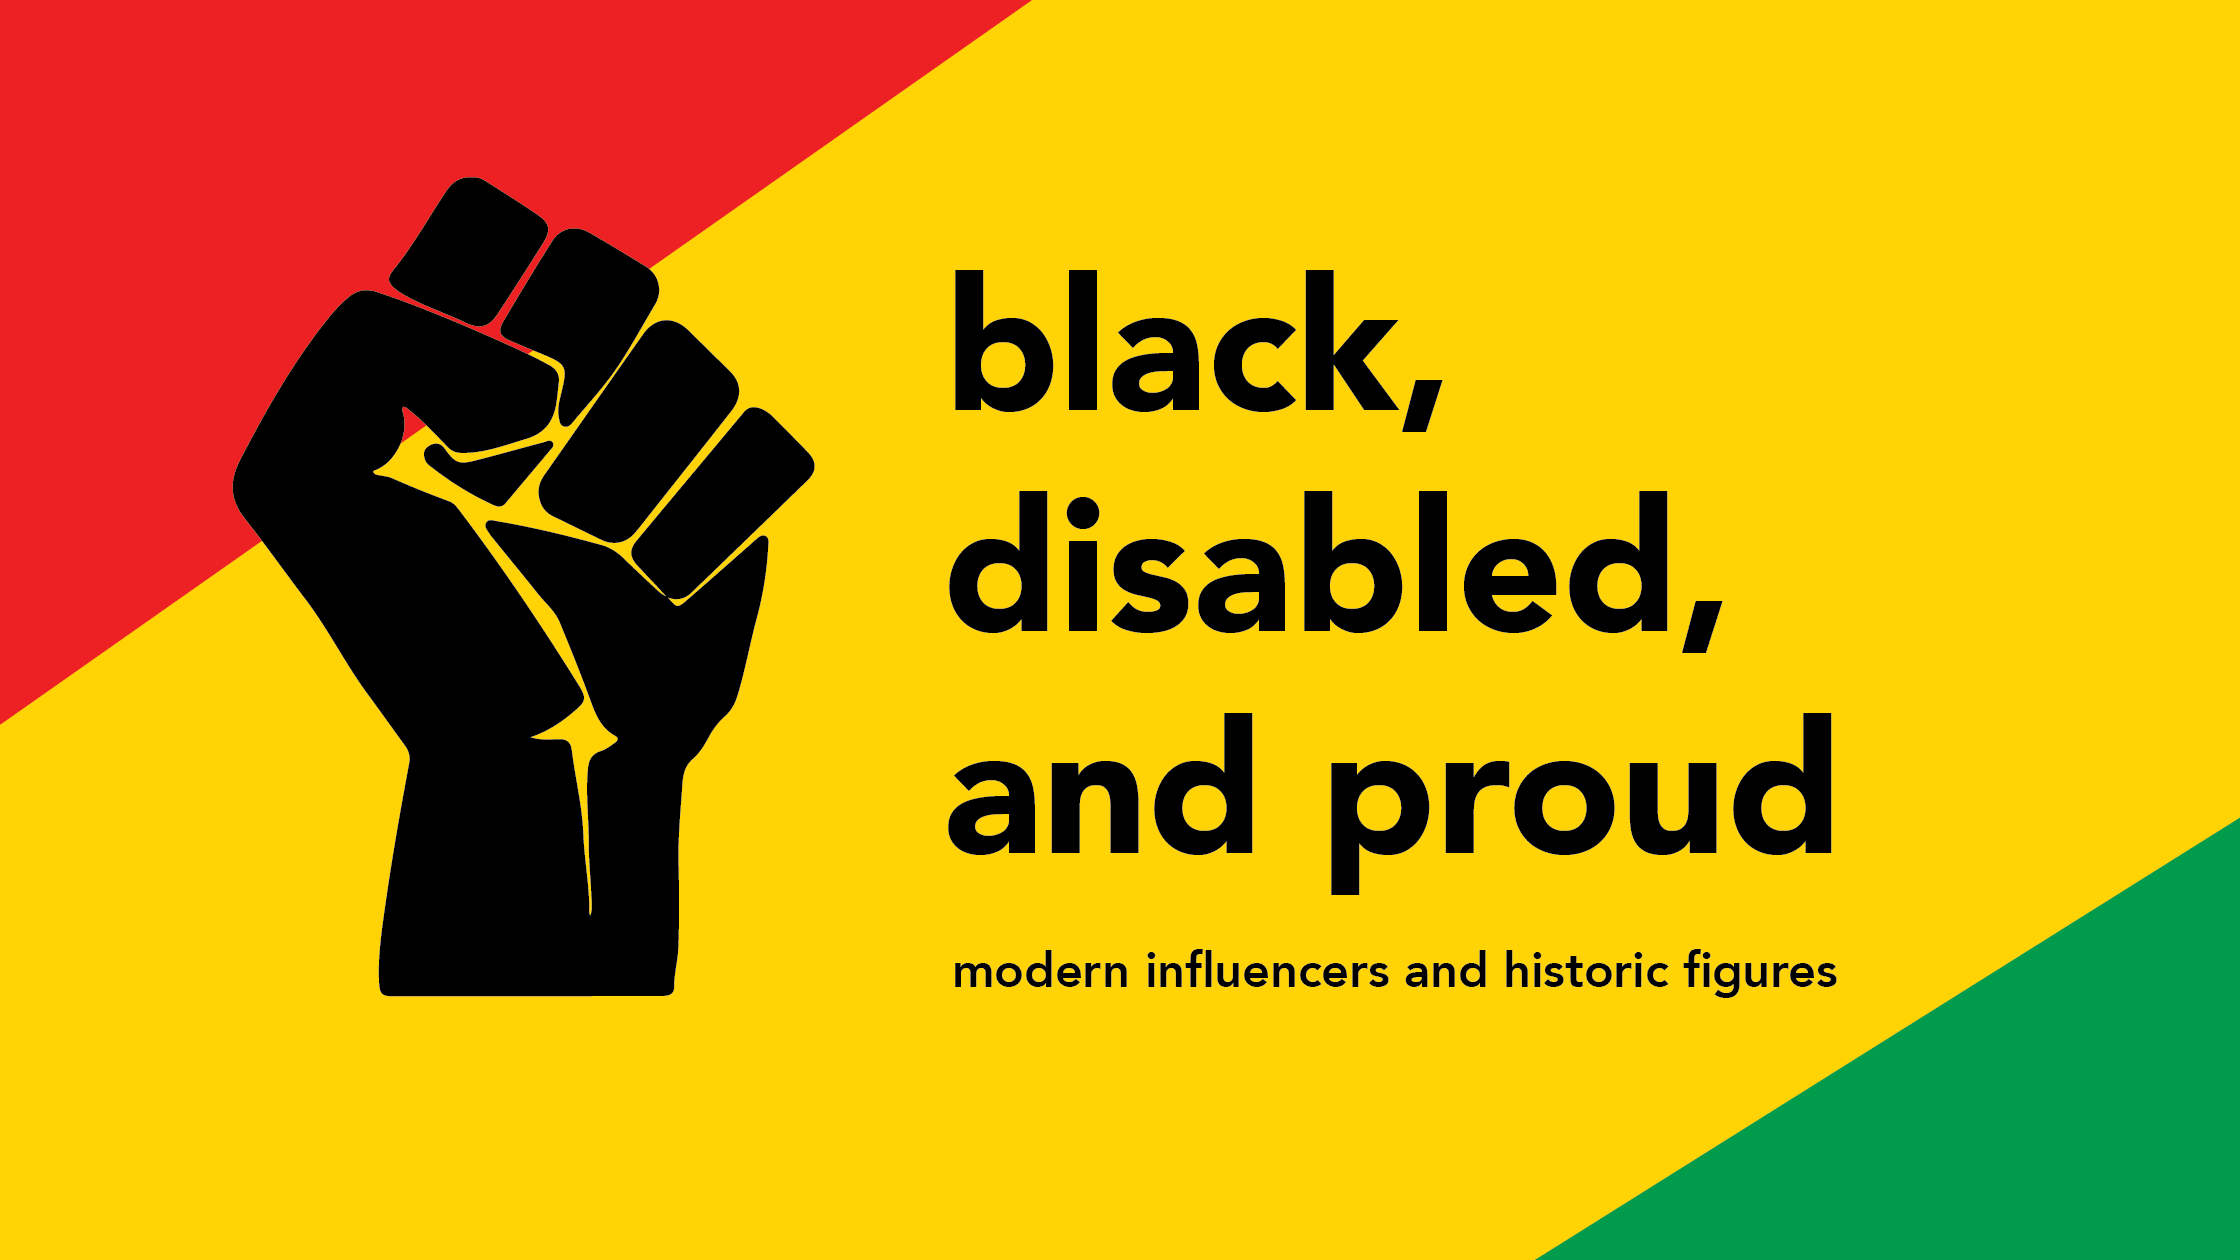 Black, Disabled, and Proud: Modern Influencers and Historic Figures